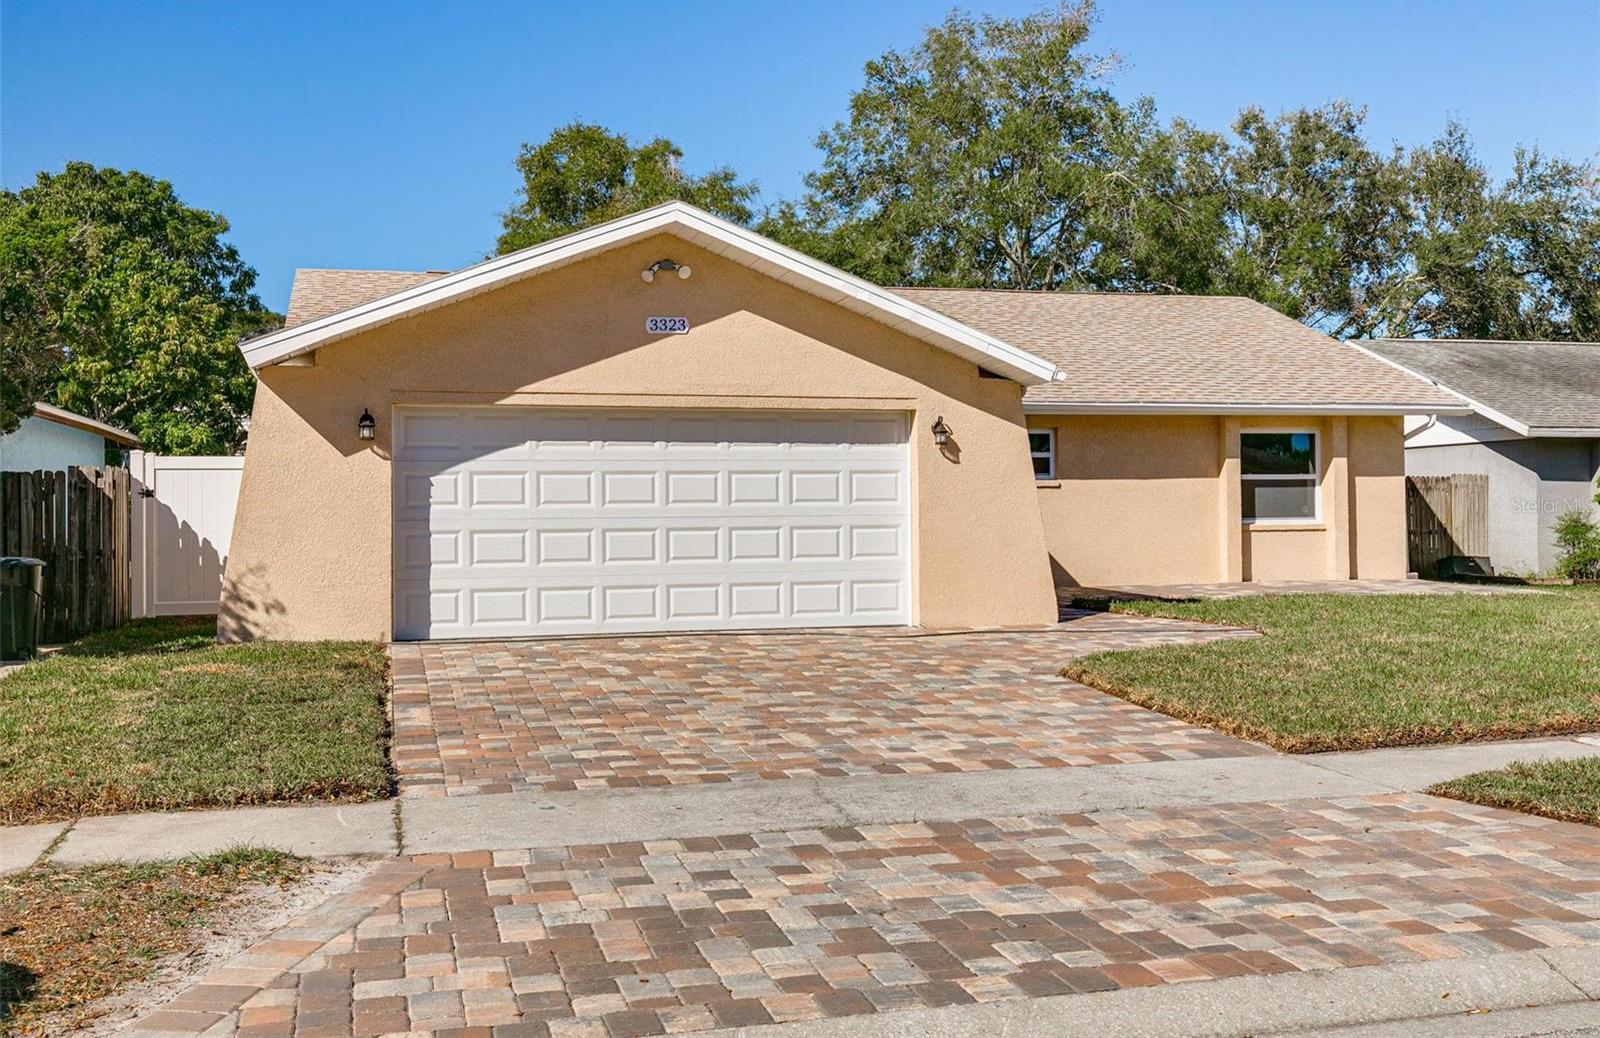 Photo one of 3323 Carriage Dr Palm Harbor FL 34684 | MLS U8219619